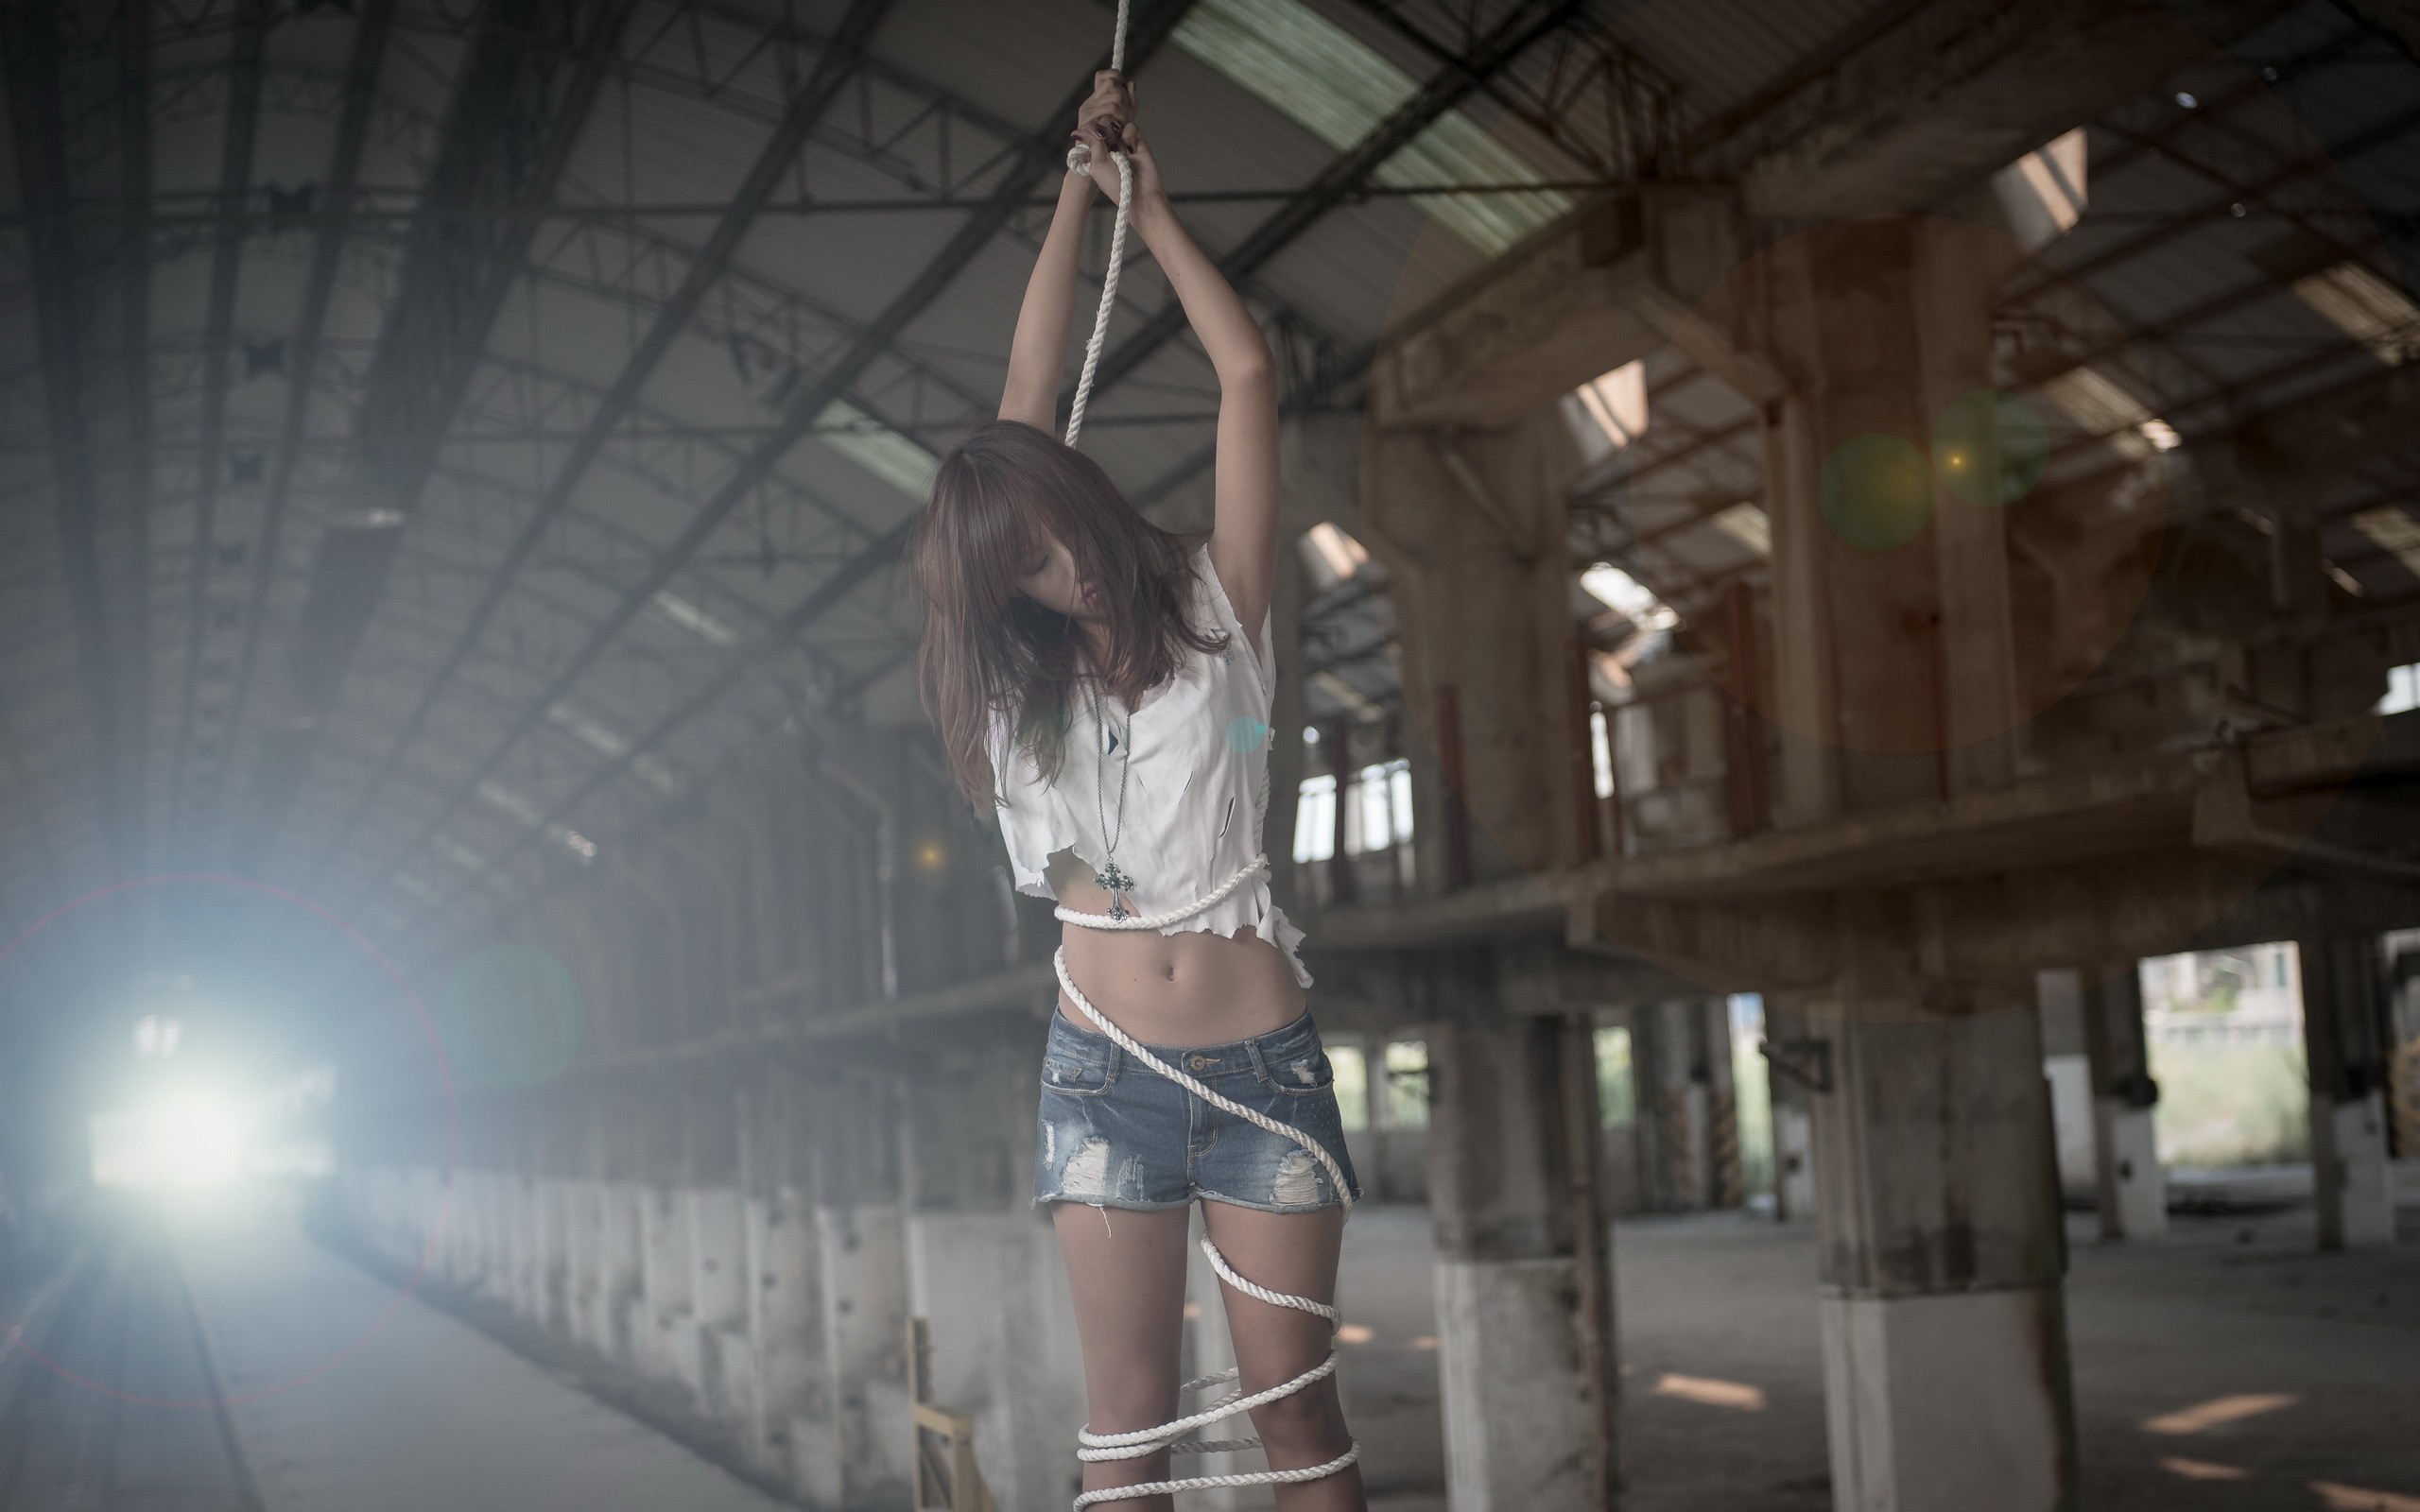 Asian Ropes Bound Girl Wallpaper 181928 2560x1600px On Wallls